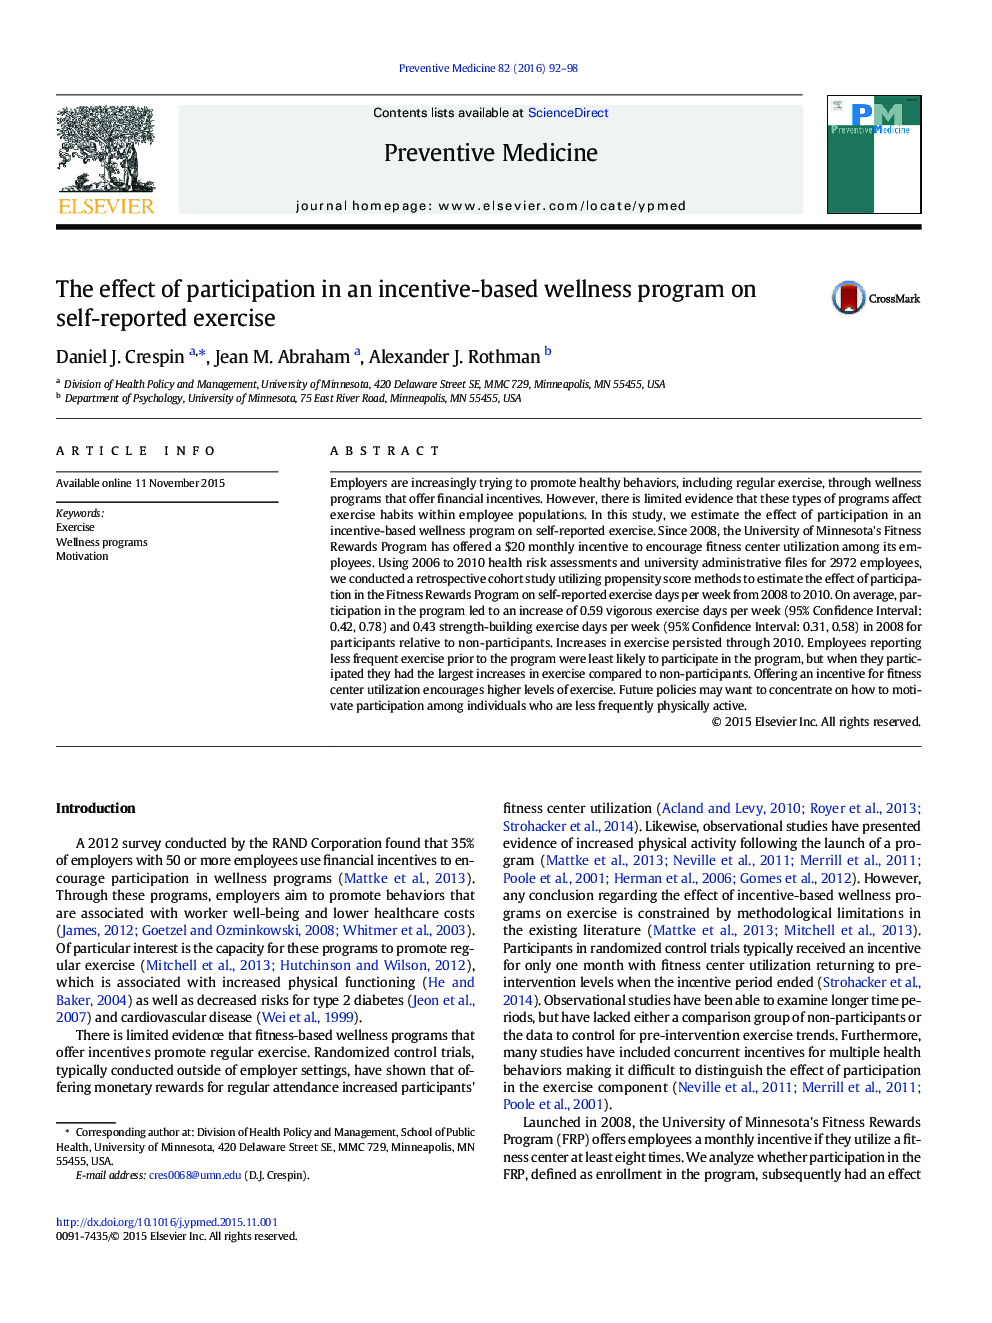 The effect of participation in an incentive-based wellness program on self-reported exercise